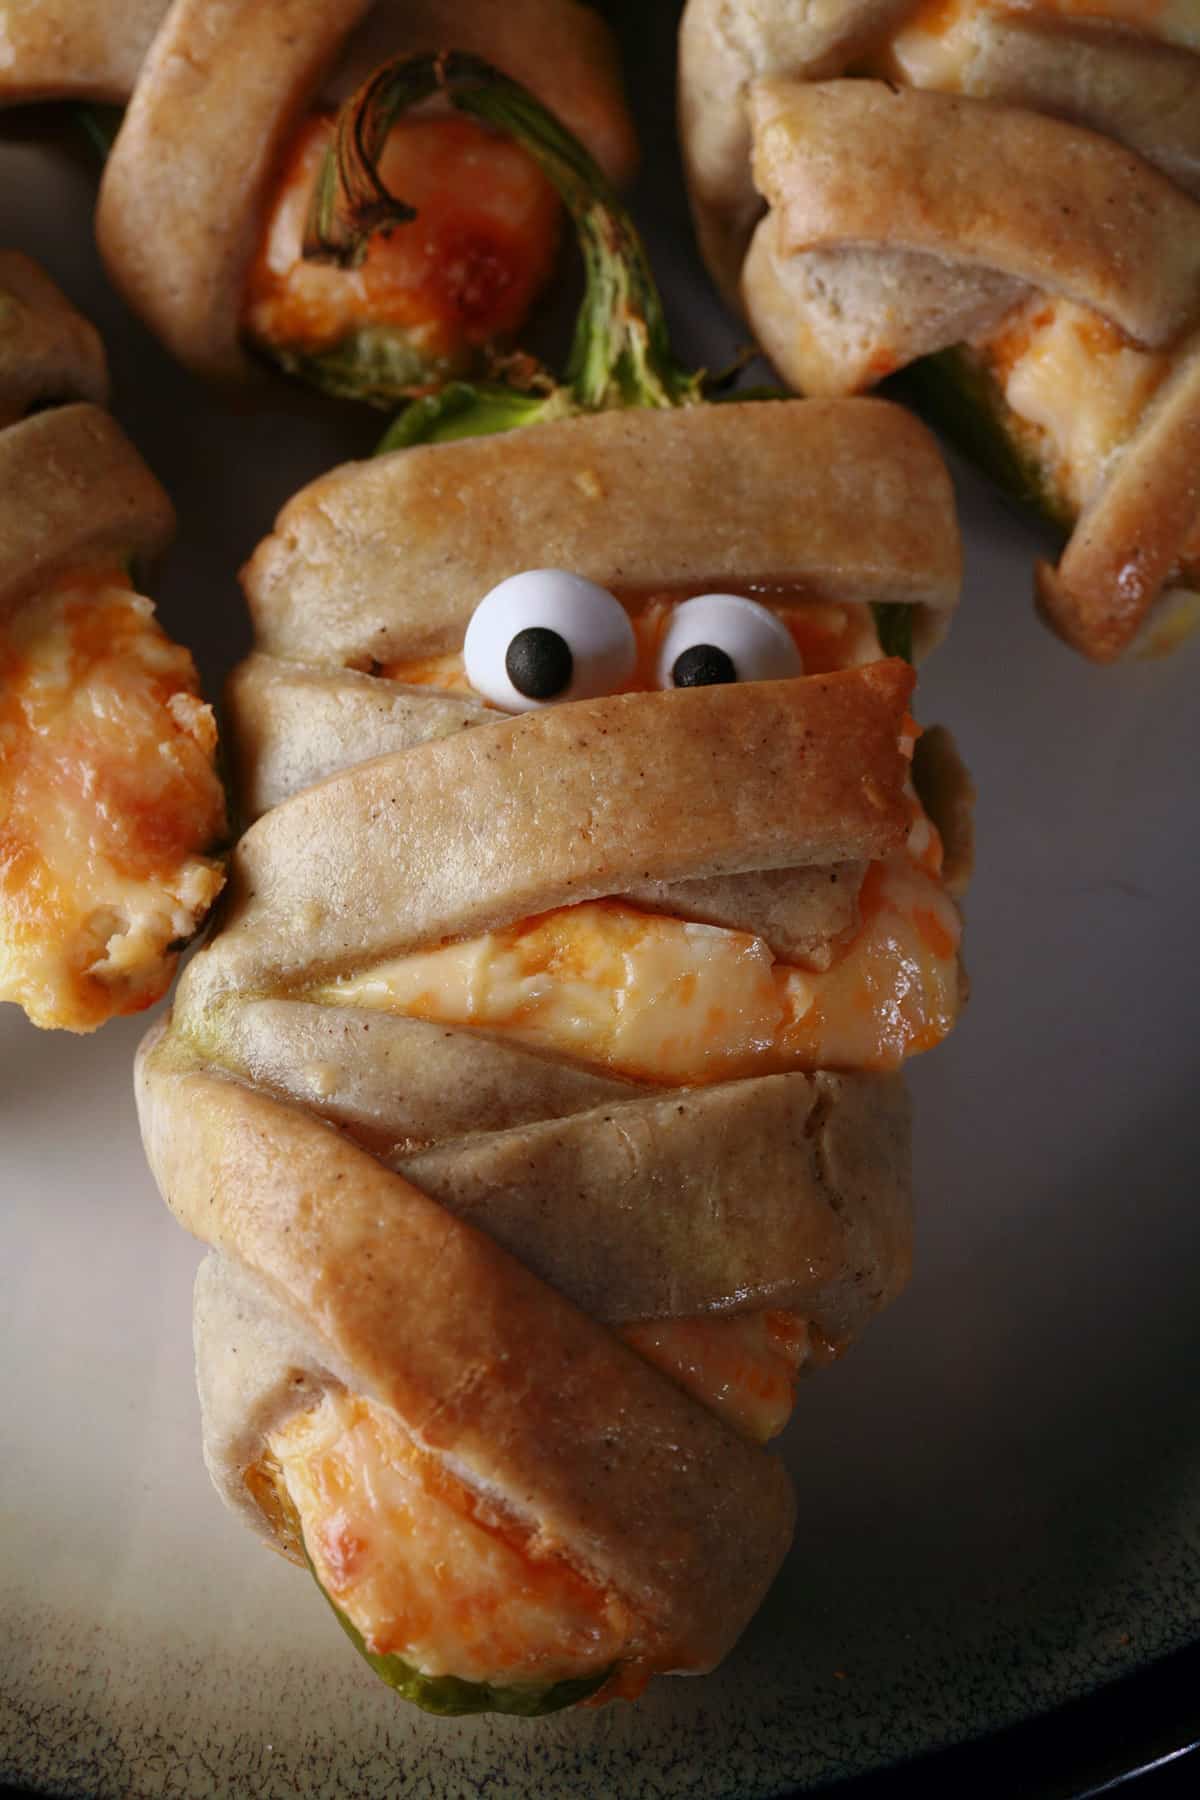 Several gluten free mummy jalapeno poppers on a plate. Each has 2 candy eyeballs.